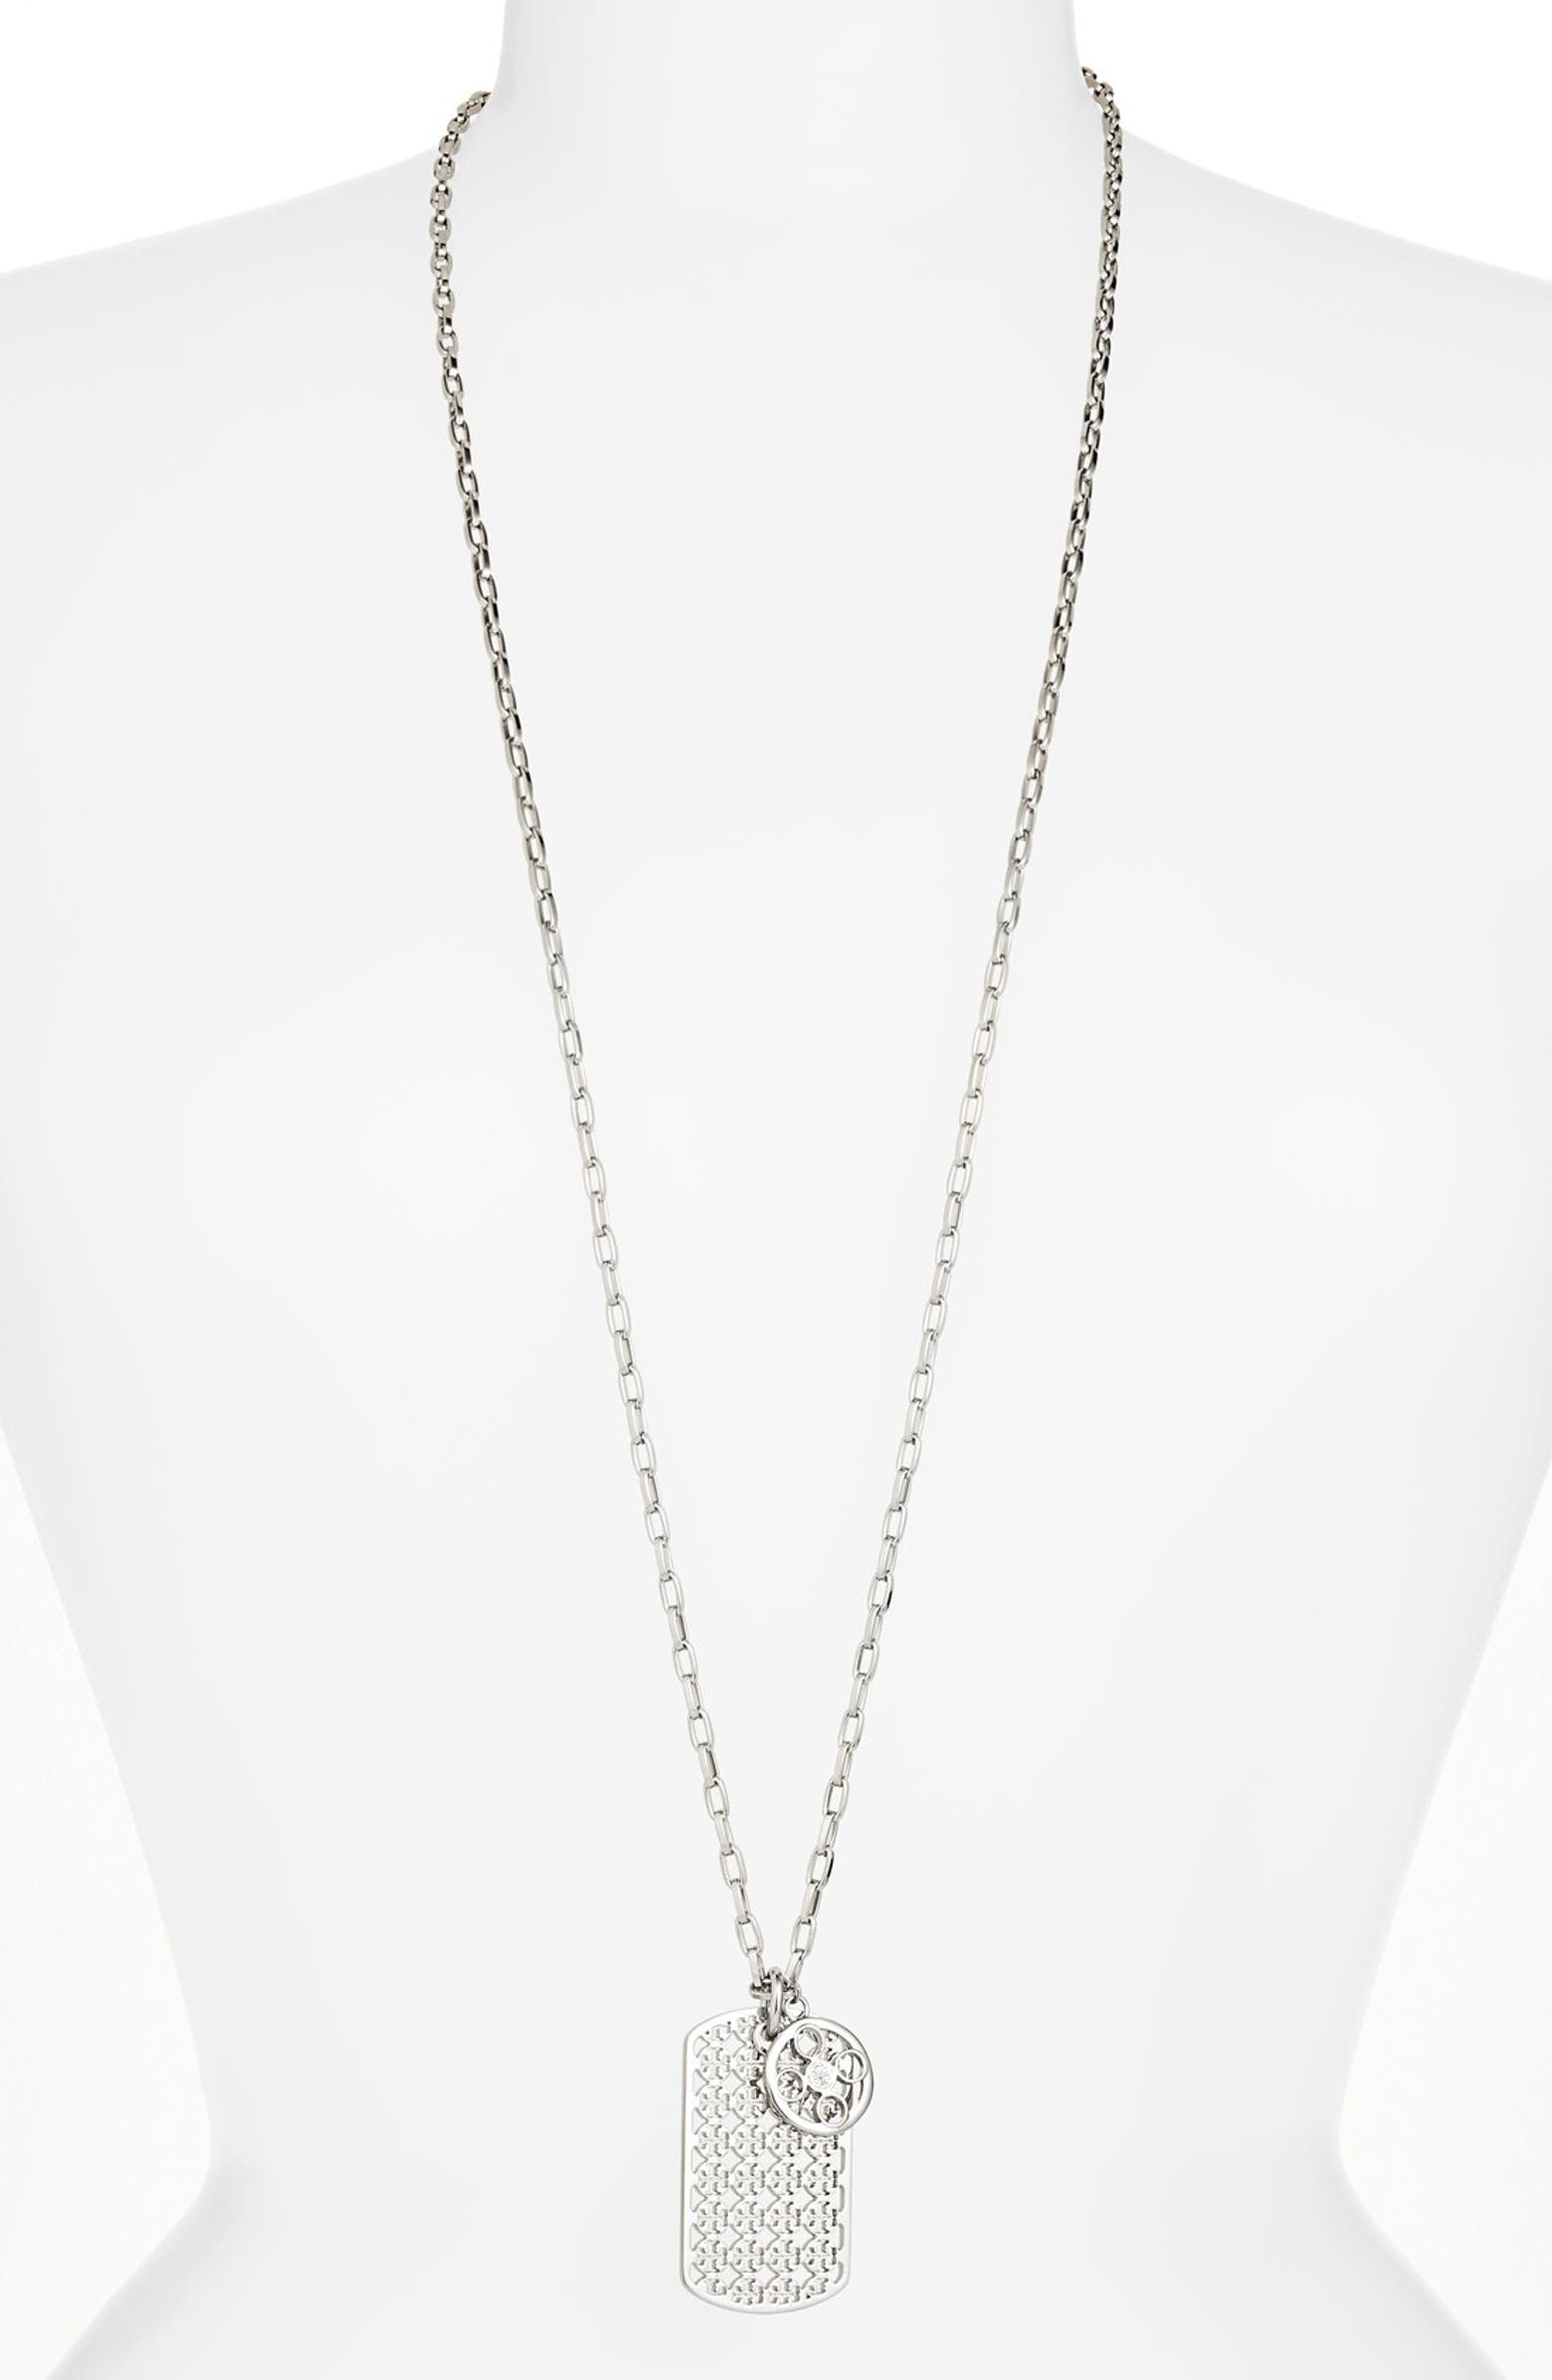 Tory Burch 'Kinsley' Long Dog Tag Pendant Necklace | Nordstrom